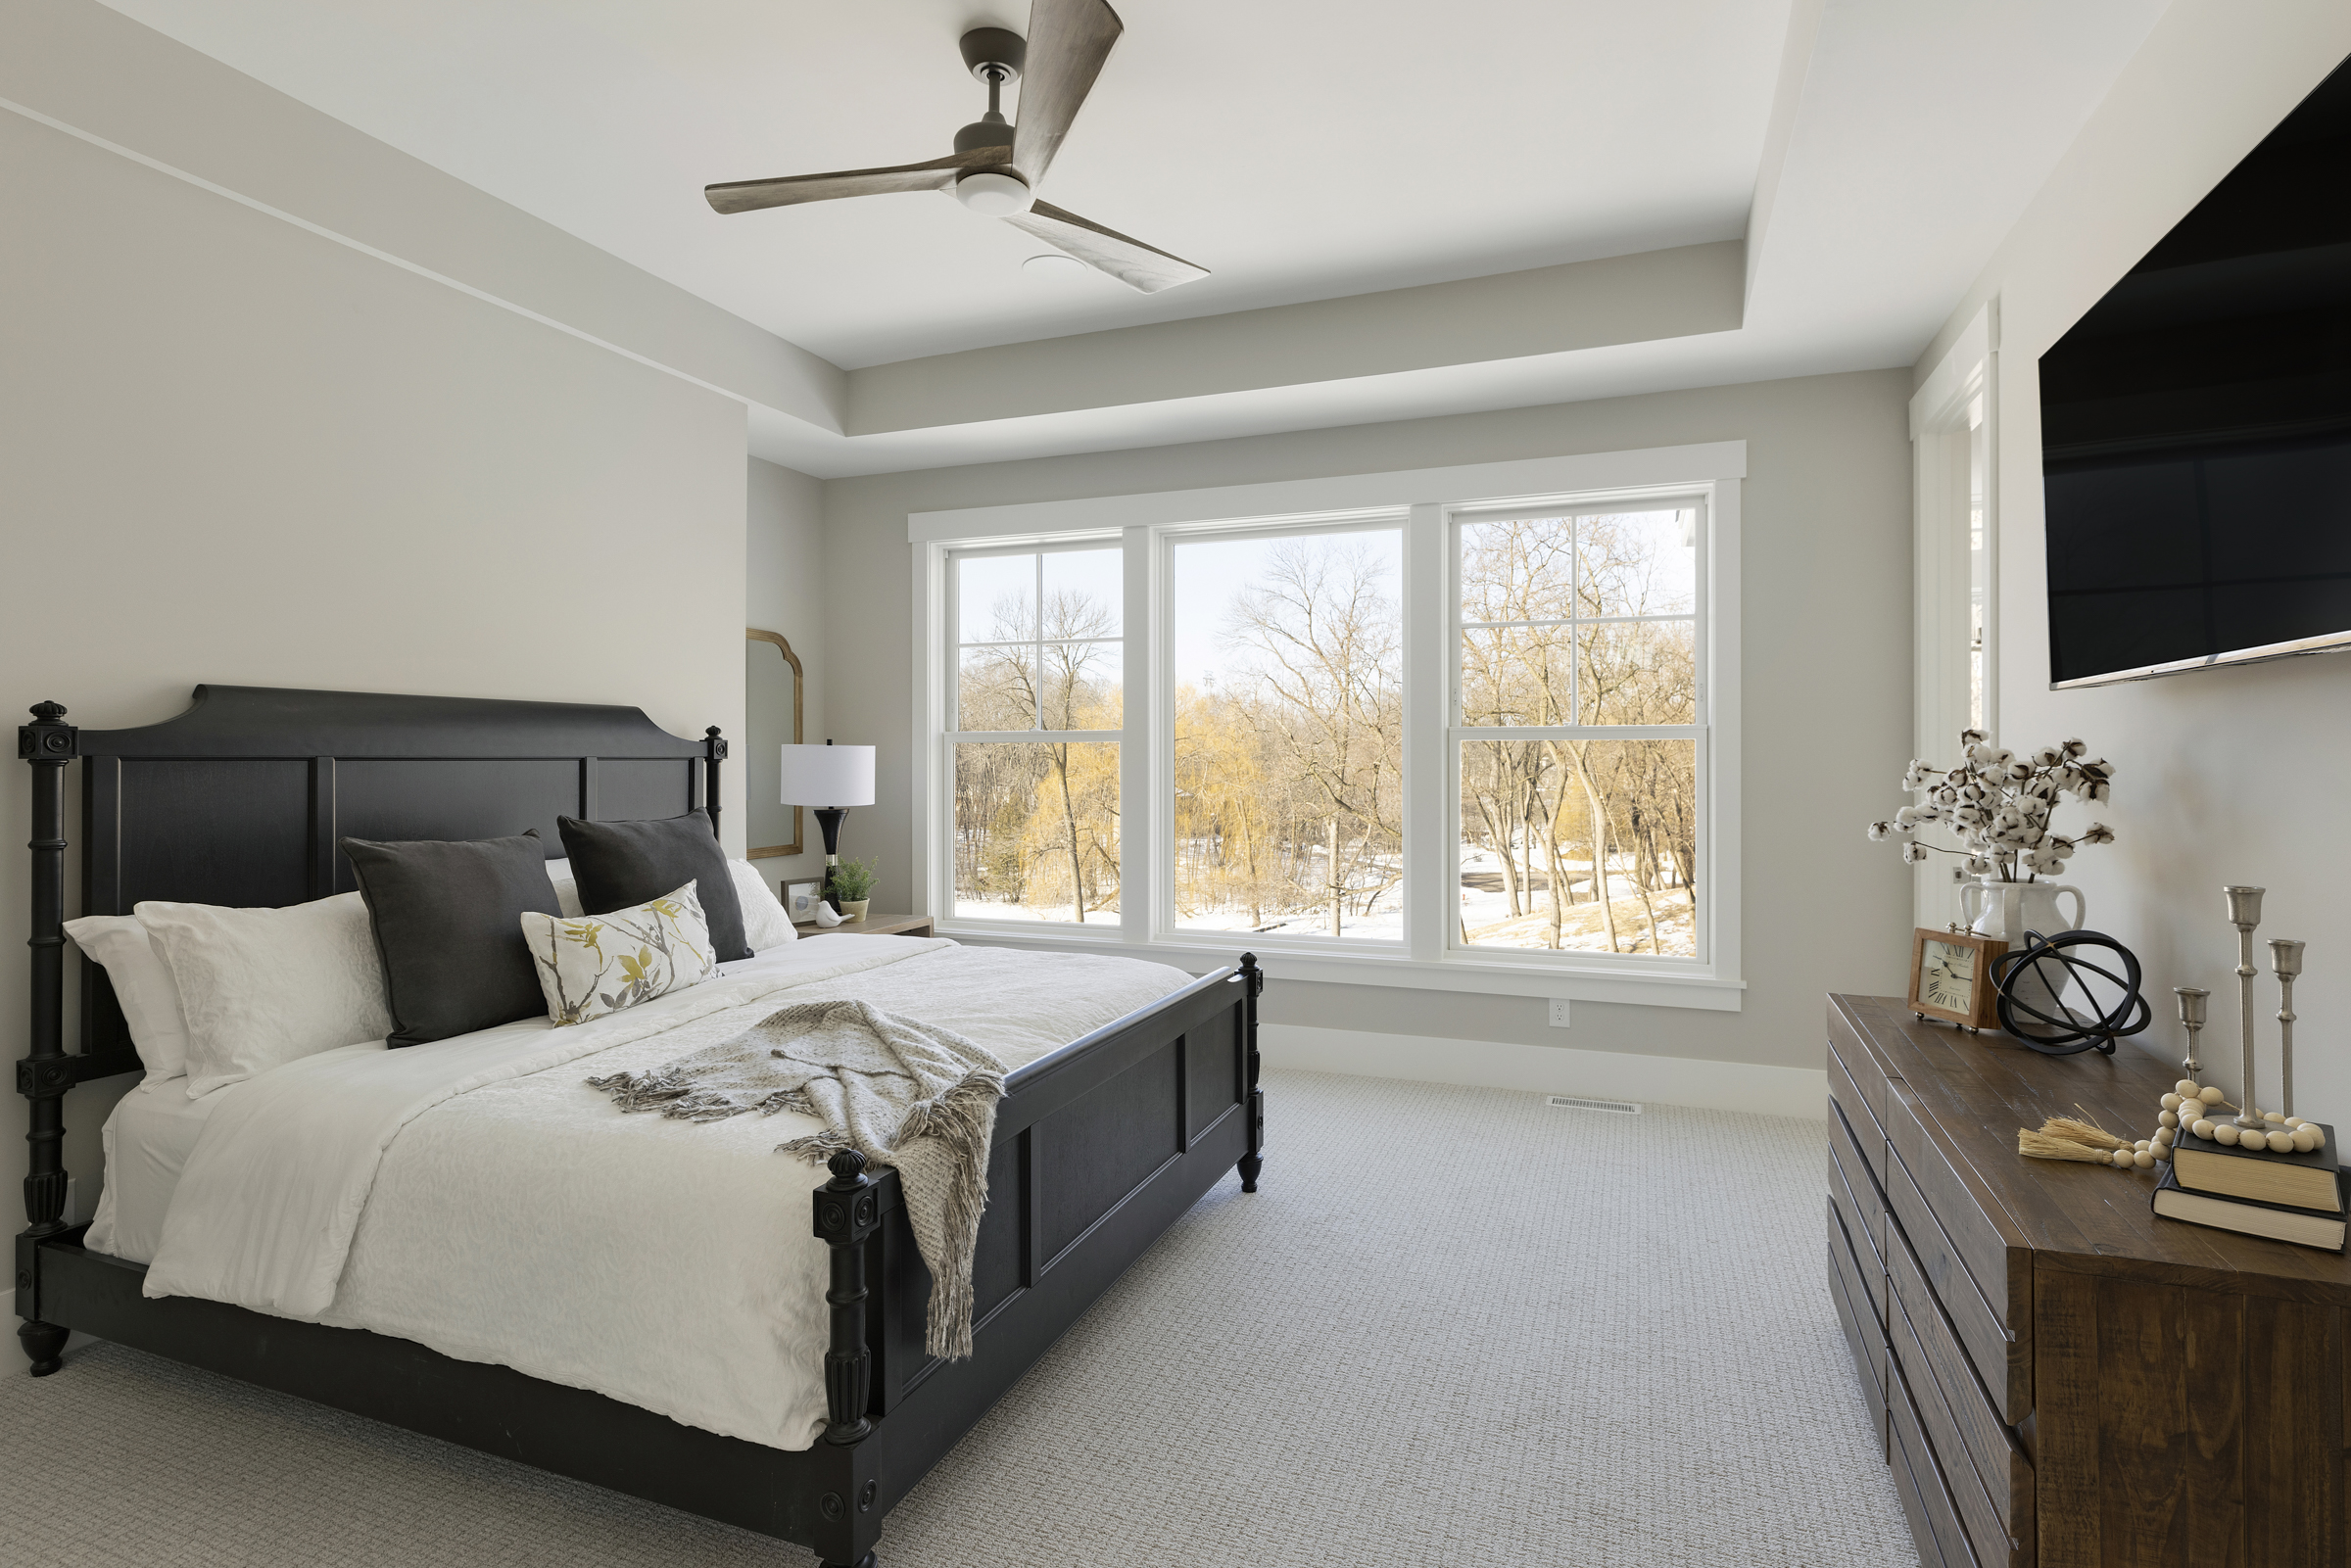 master bedroom with a king sized bed on the left side, 3 large windows on the back wall, and a brown dresser with a television hanging above it on the right